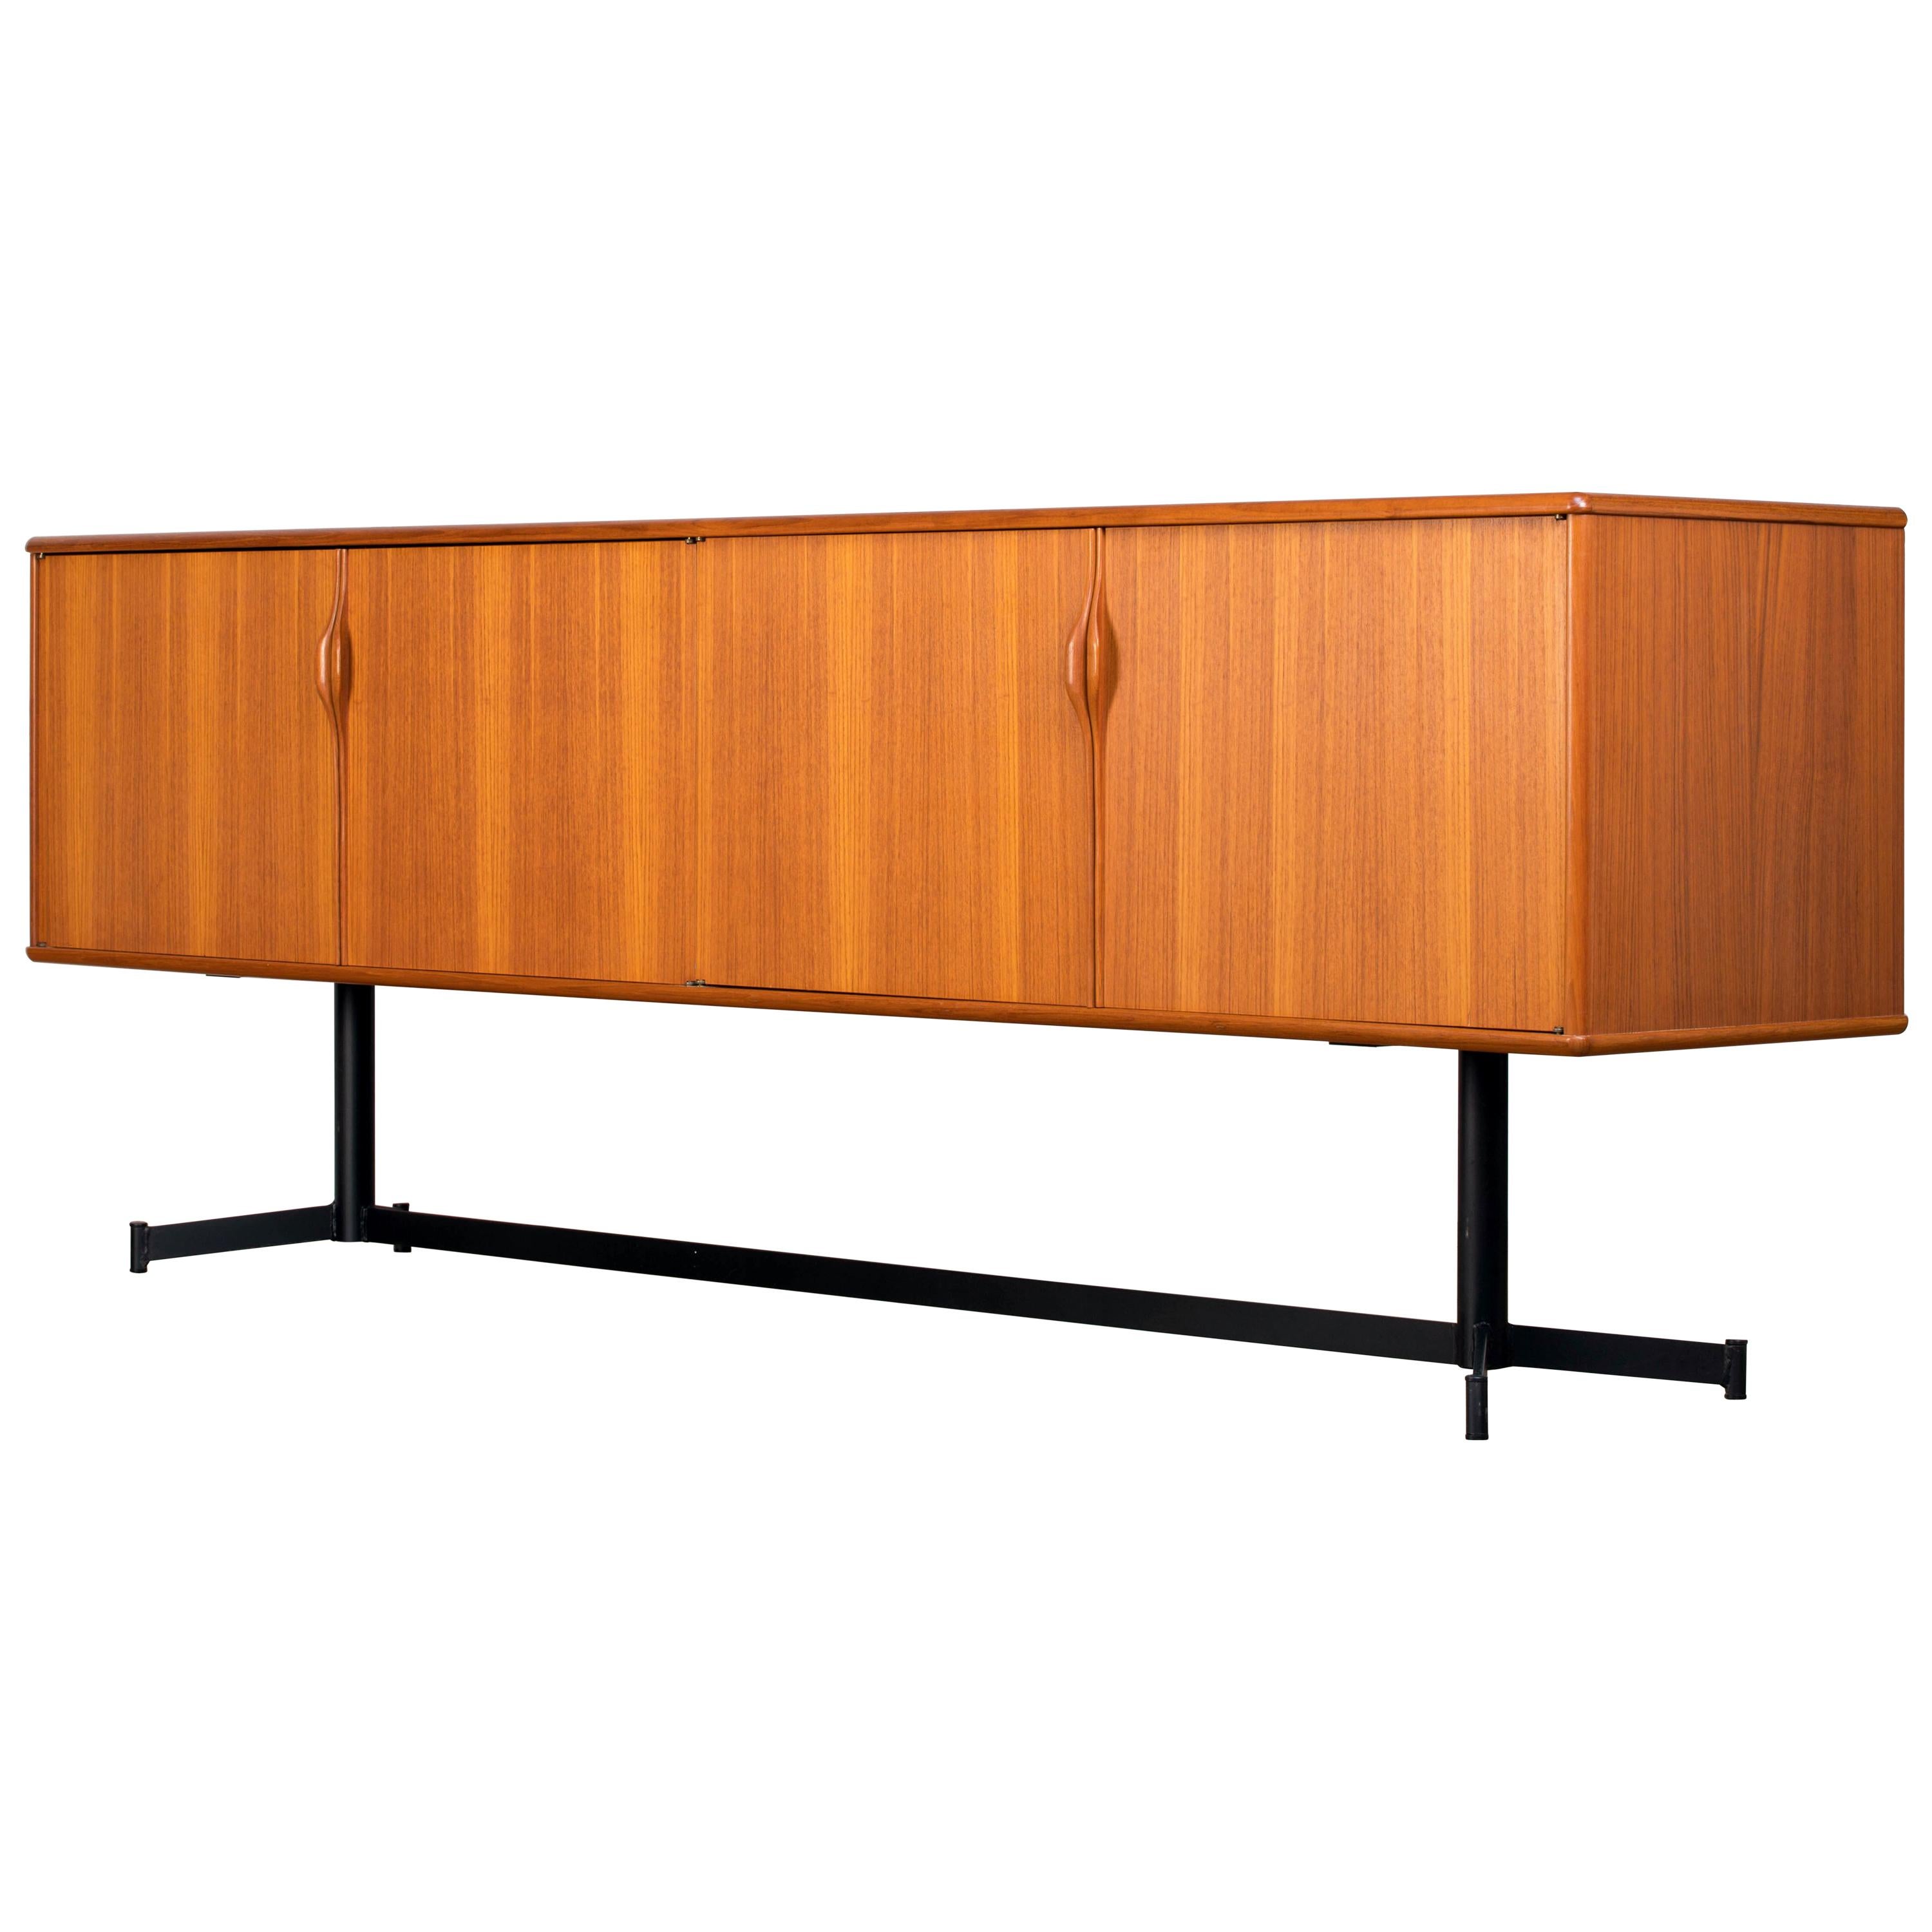 Midcentury teak sideboard from the 1960s. It is a shining example of the form and function synonymous with furniture of this era. It has is all, well-built, great design and heaviness. Four doors hiding storage space. The most remarkable aspect of